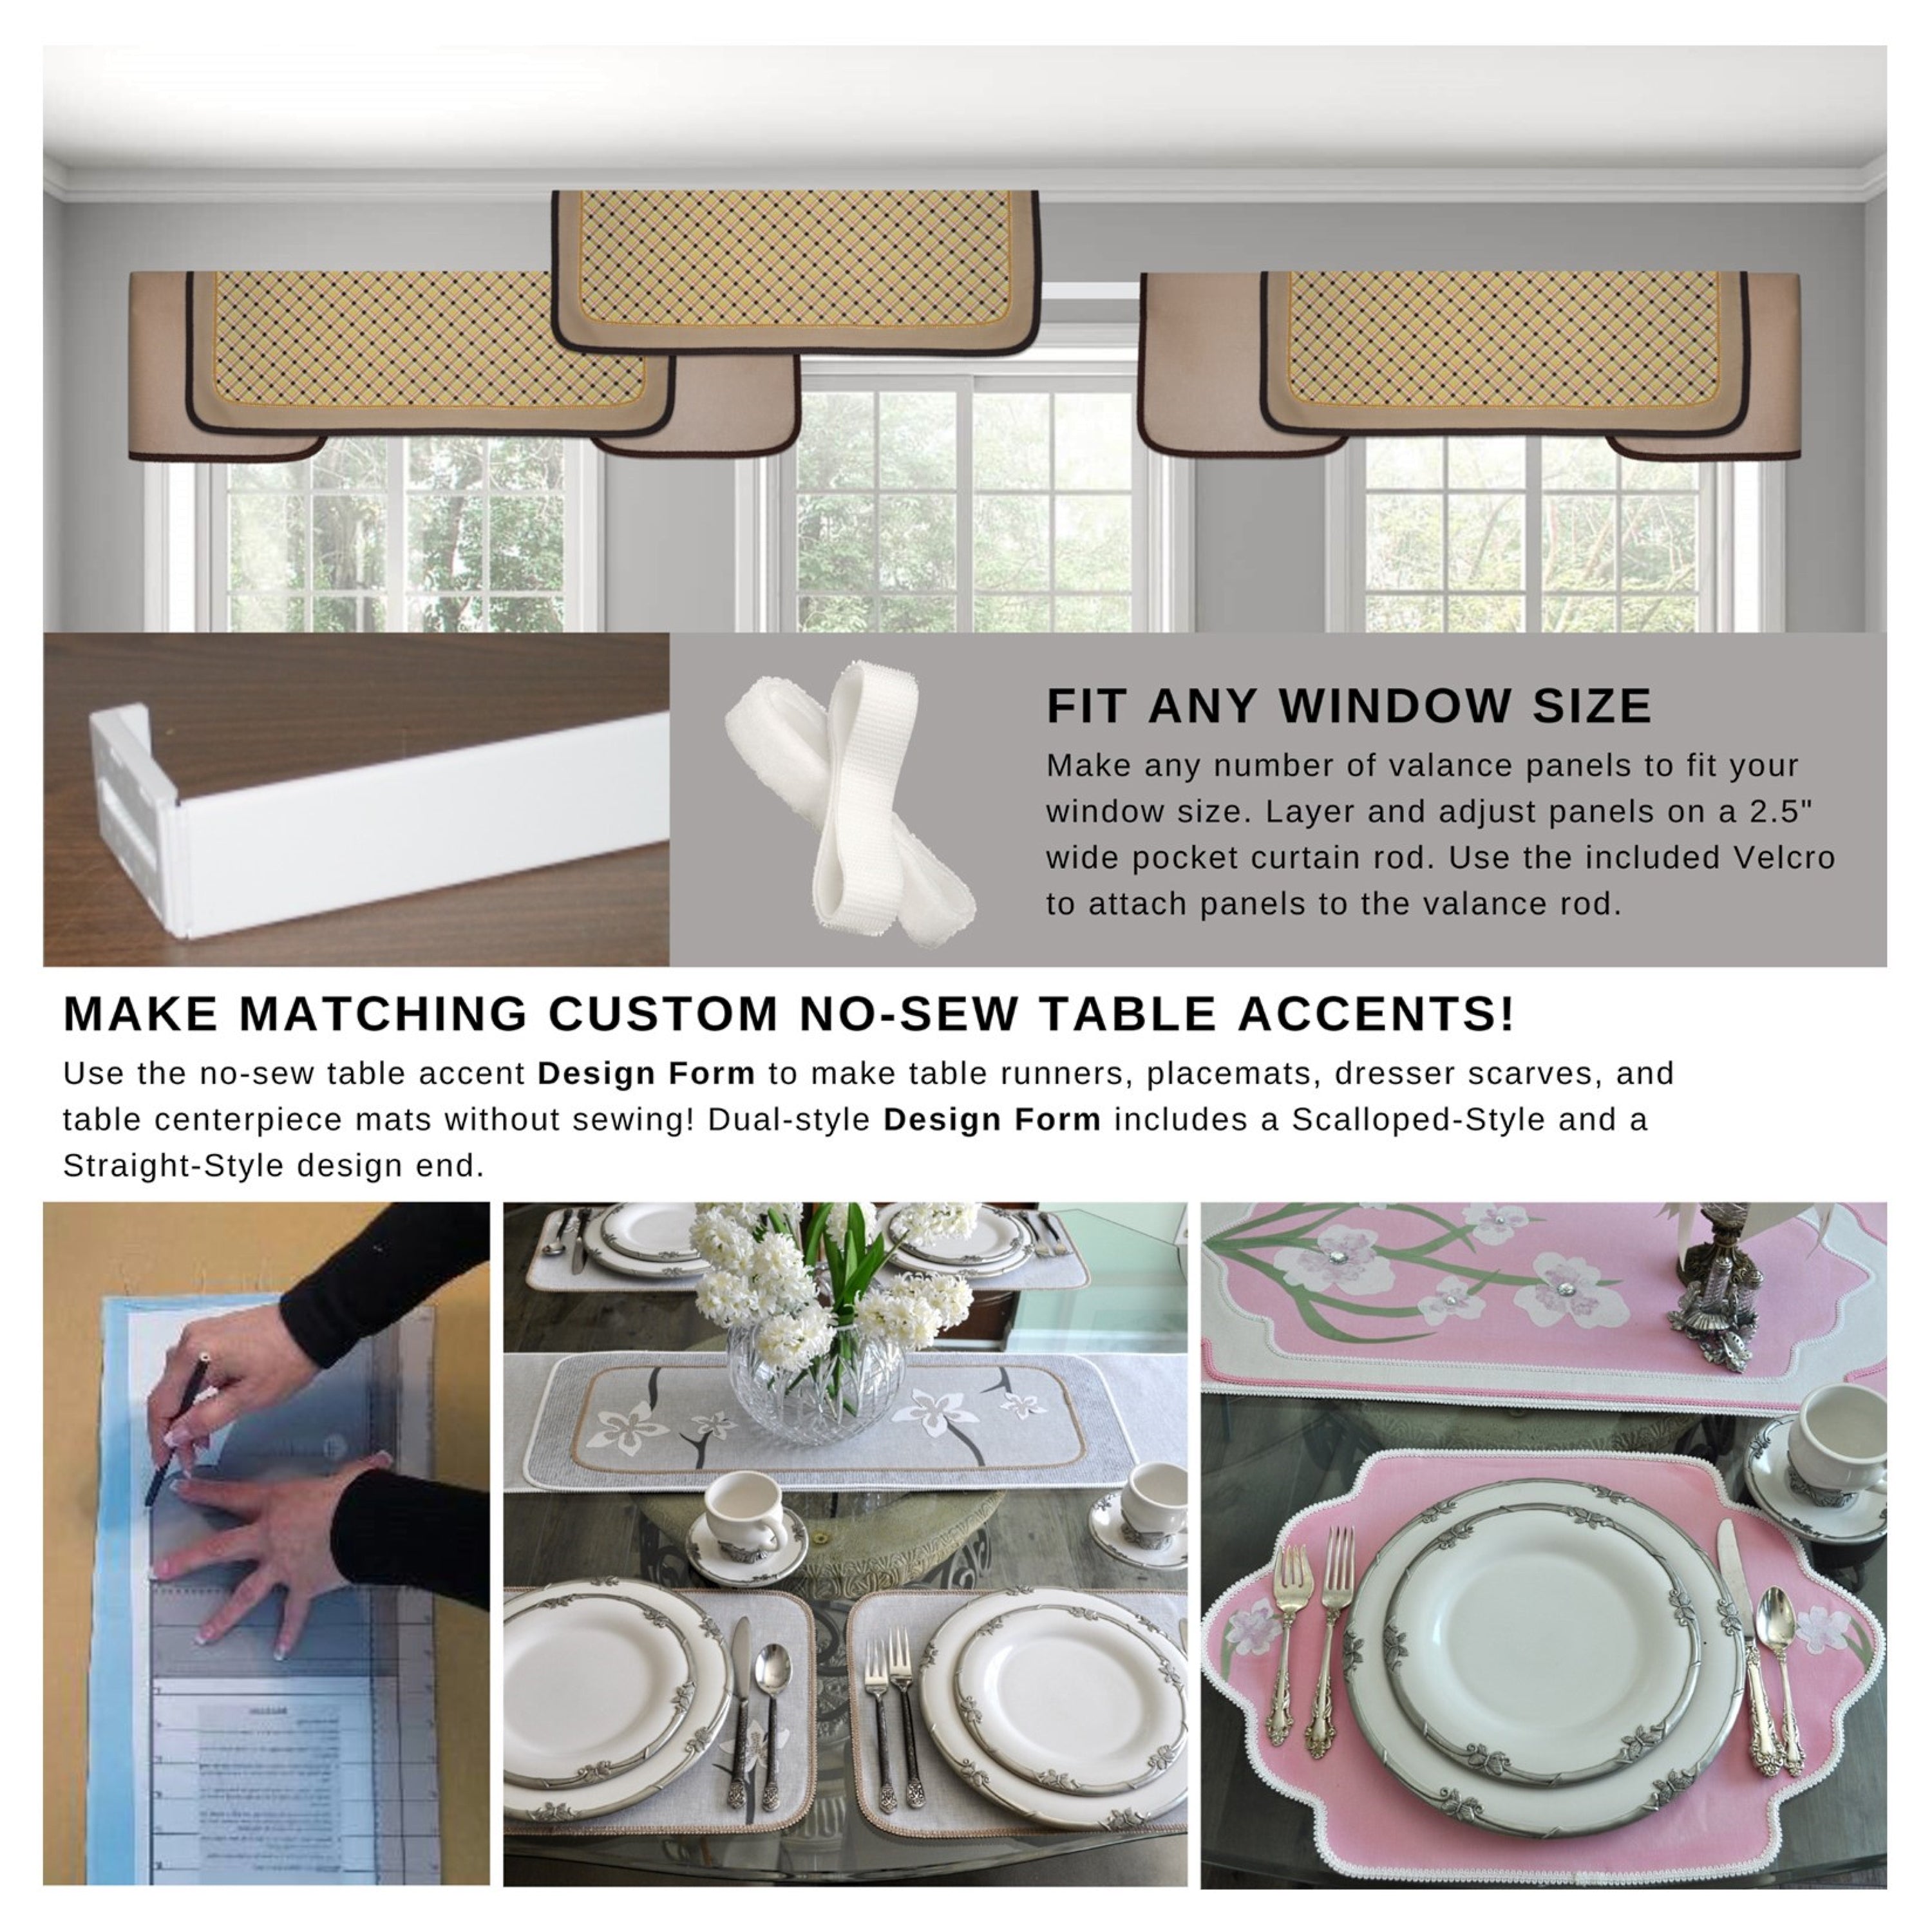 Traceable Designer No-Sew Straight and Layered-Style Cornice Valance & Table Decorating Kit for DIY Home Decorating